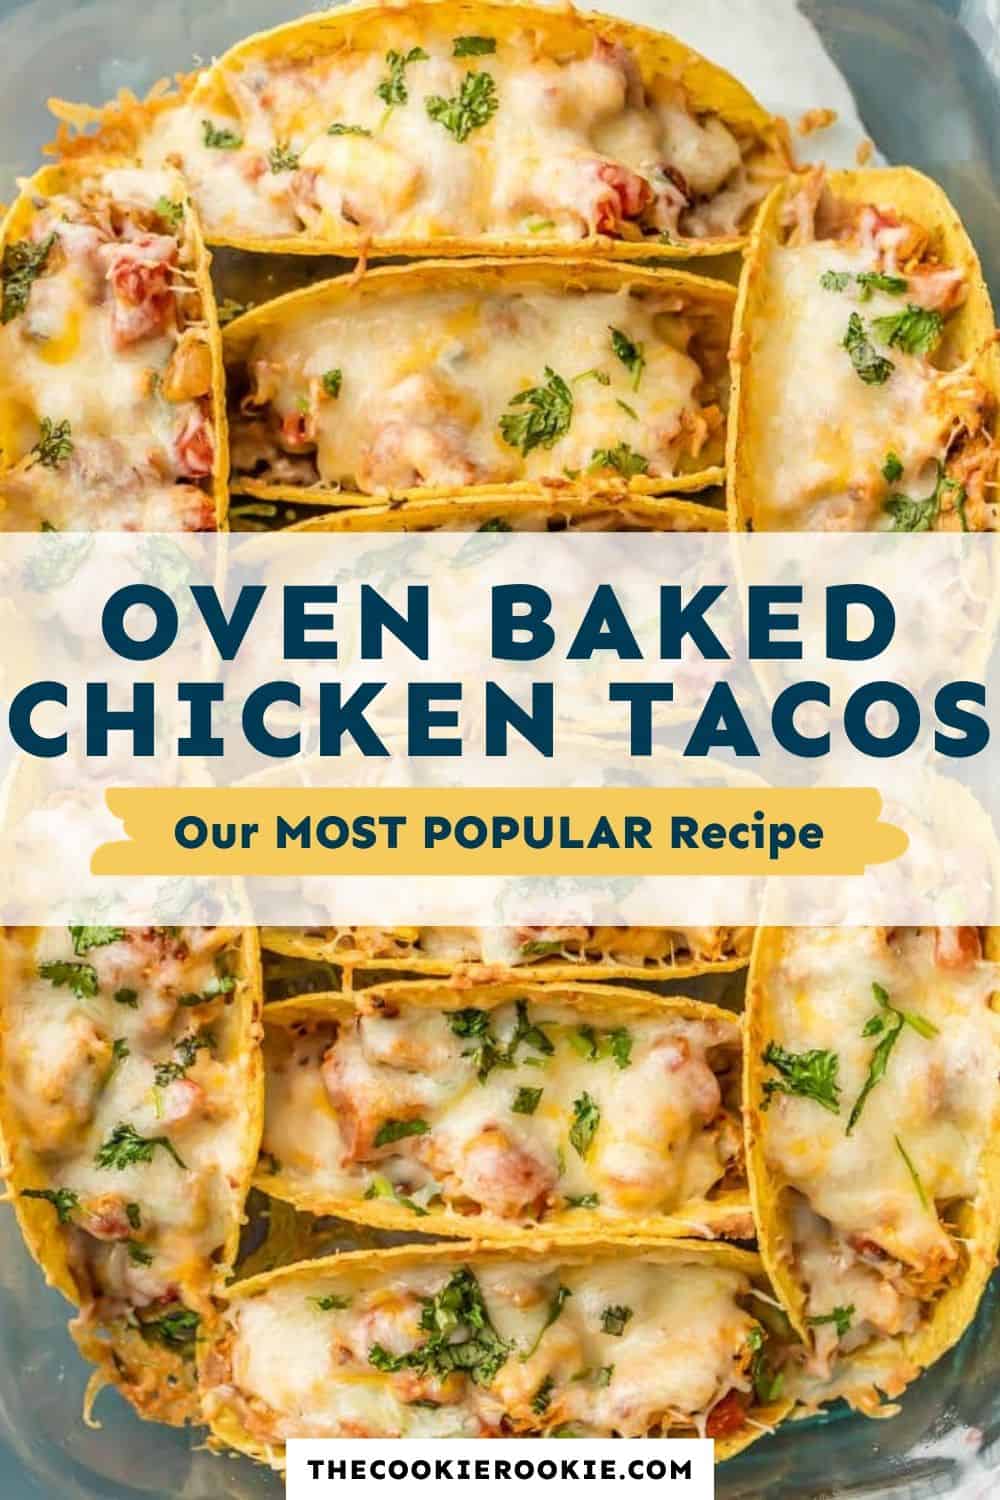 Baked Chicken Tacos (HOW TO VIDEO) - The Cookie Rookie